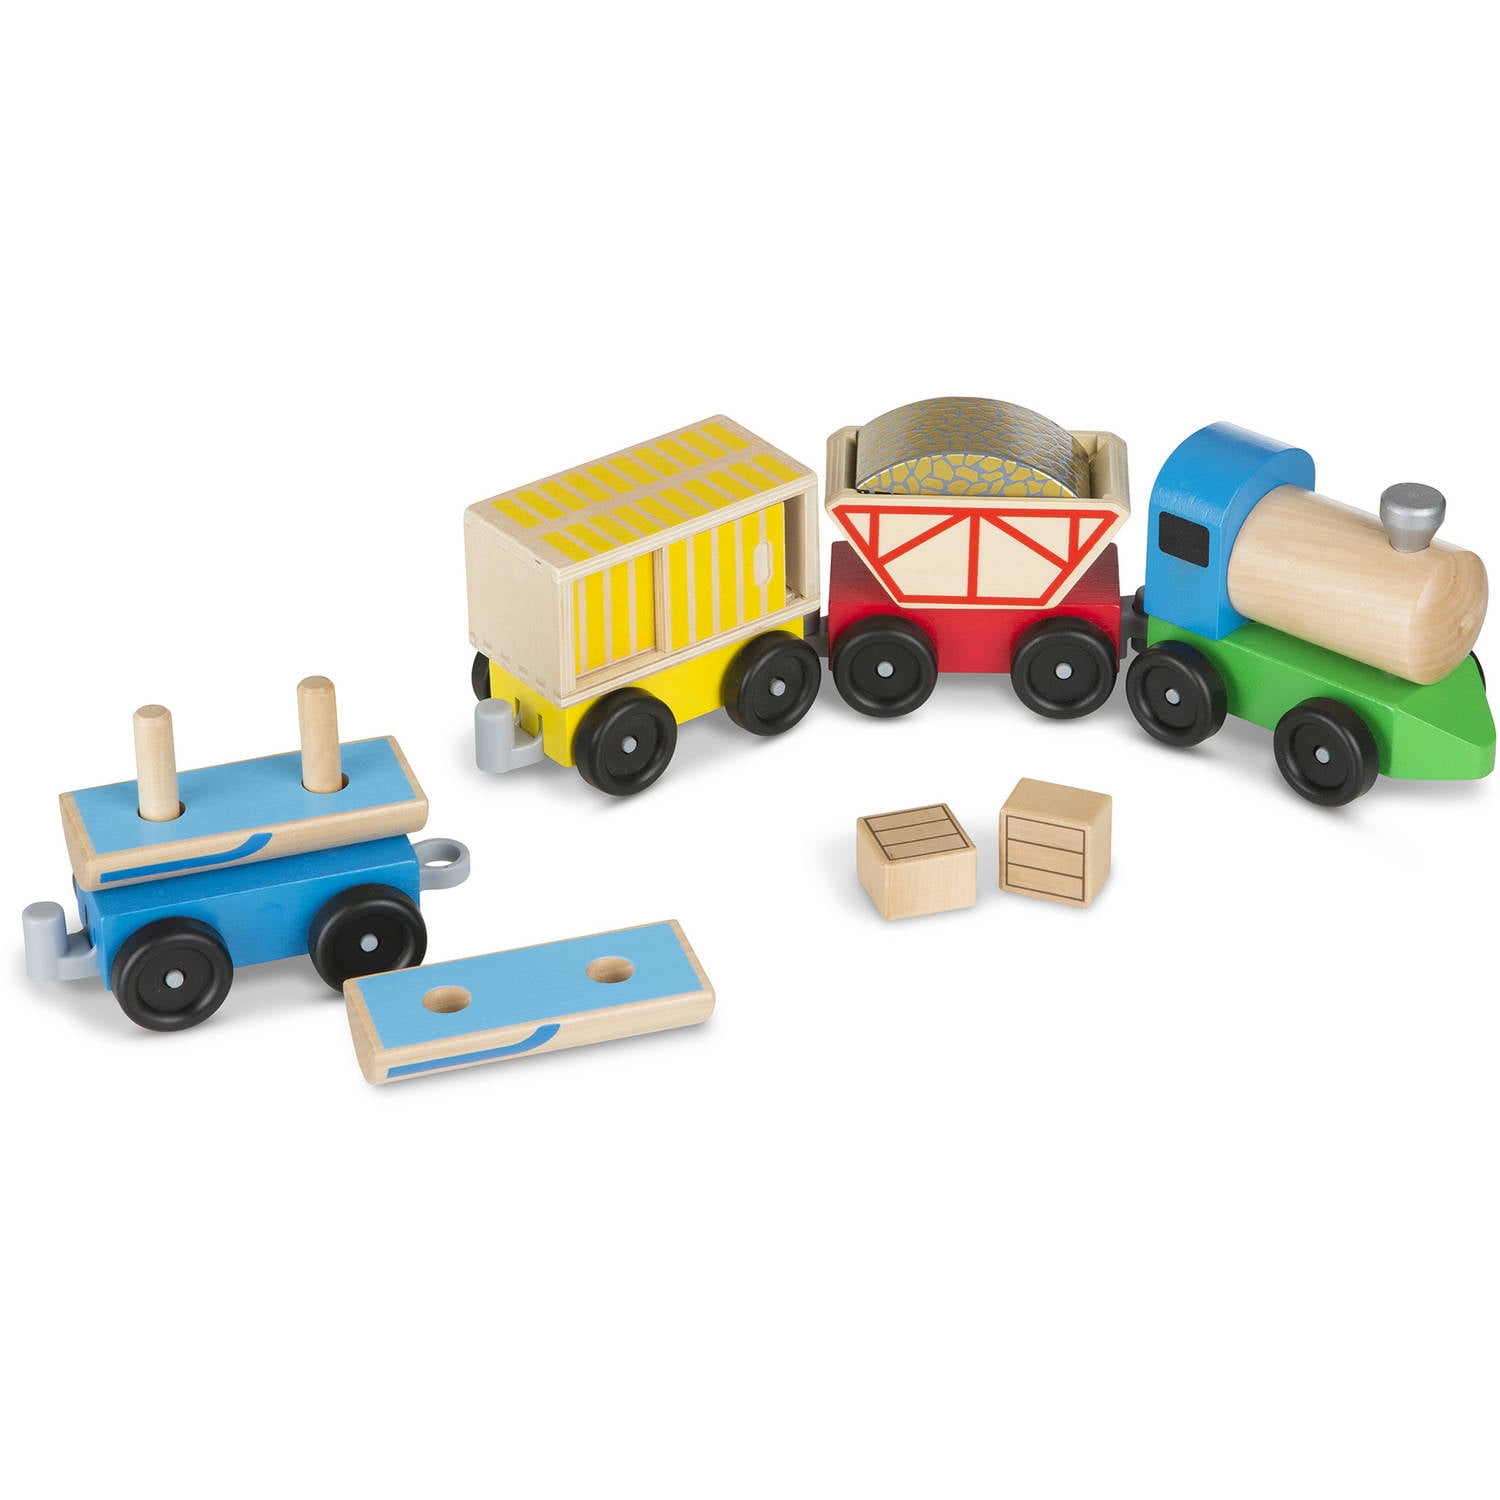 Melissa and Doug Cargo Train Classic Wooden Toy with 4 Linking cars,  approx. 5 inches long each)